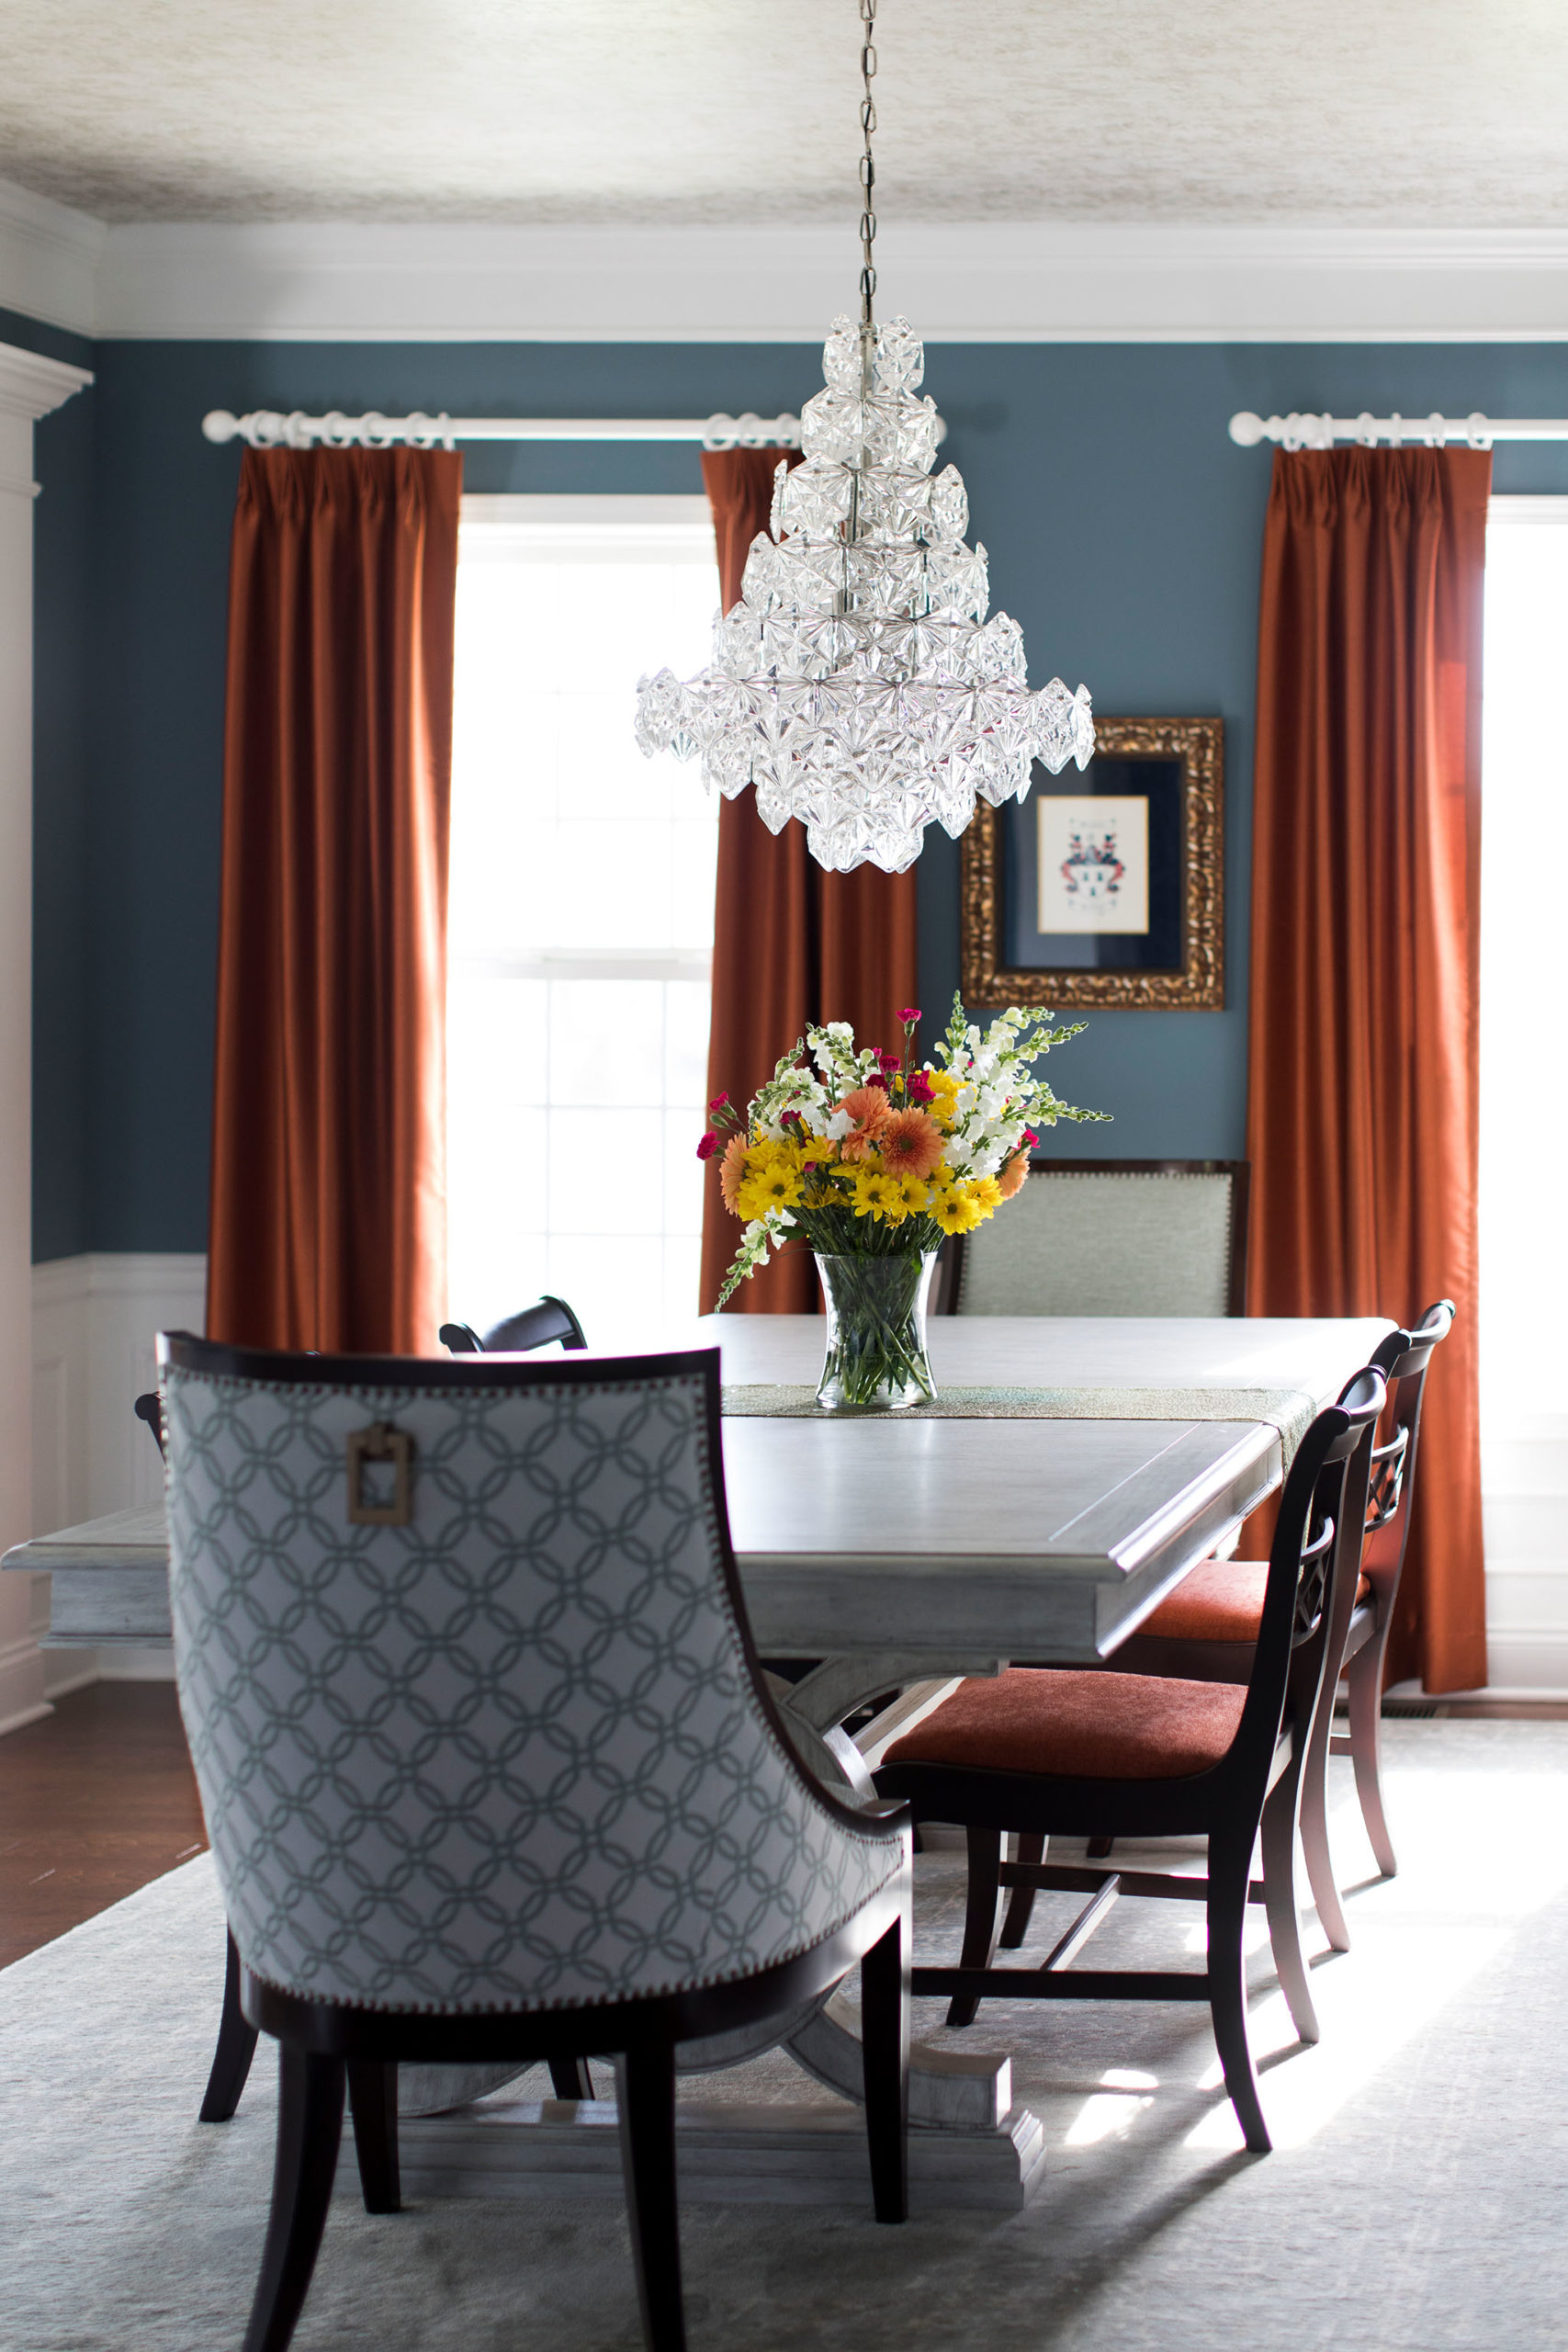 Orange Drapery panels contrasting blue walls in Dining Room Space Lindsey Putzier Design Studio